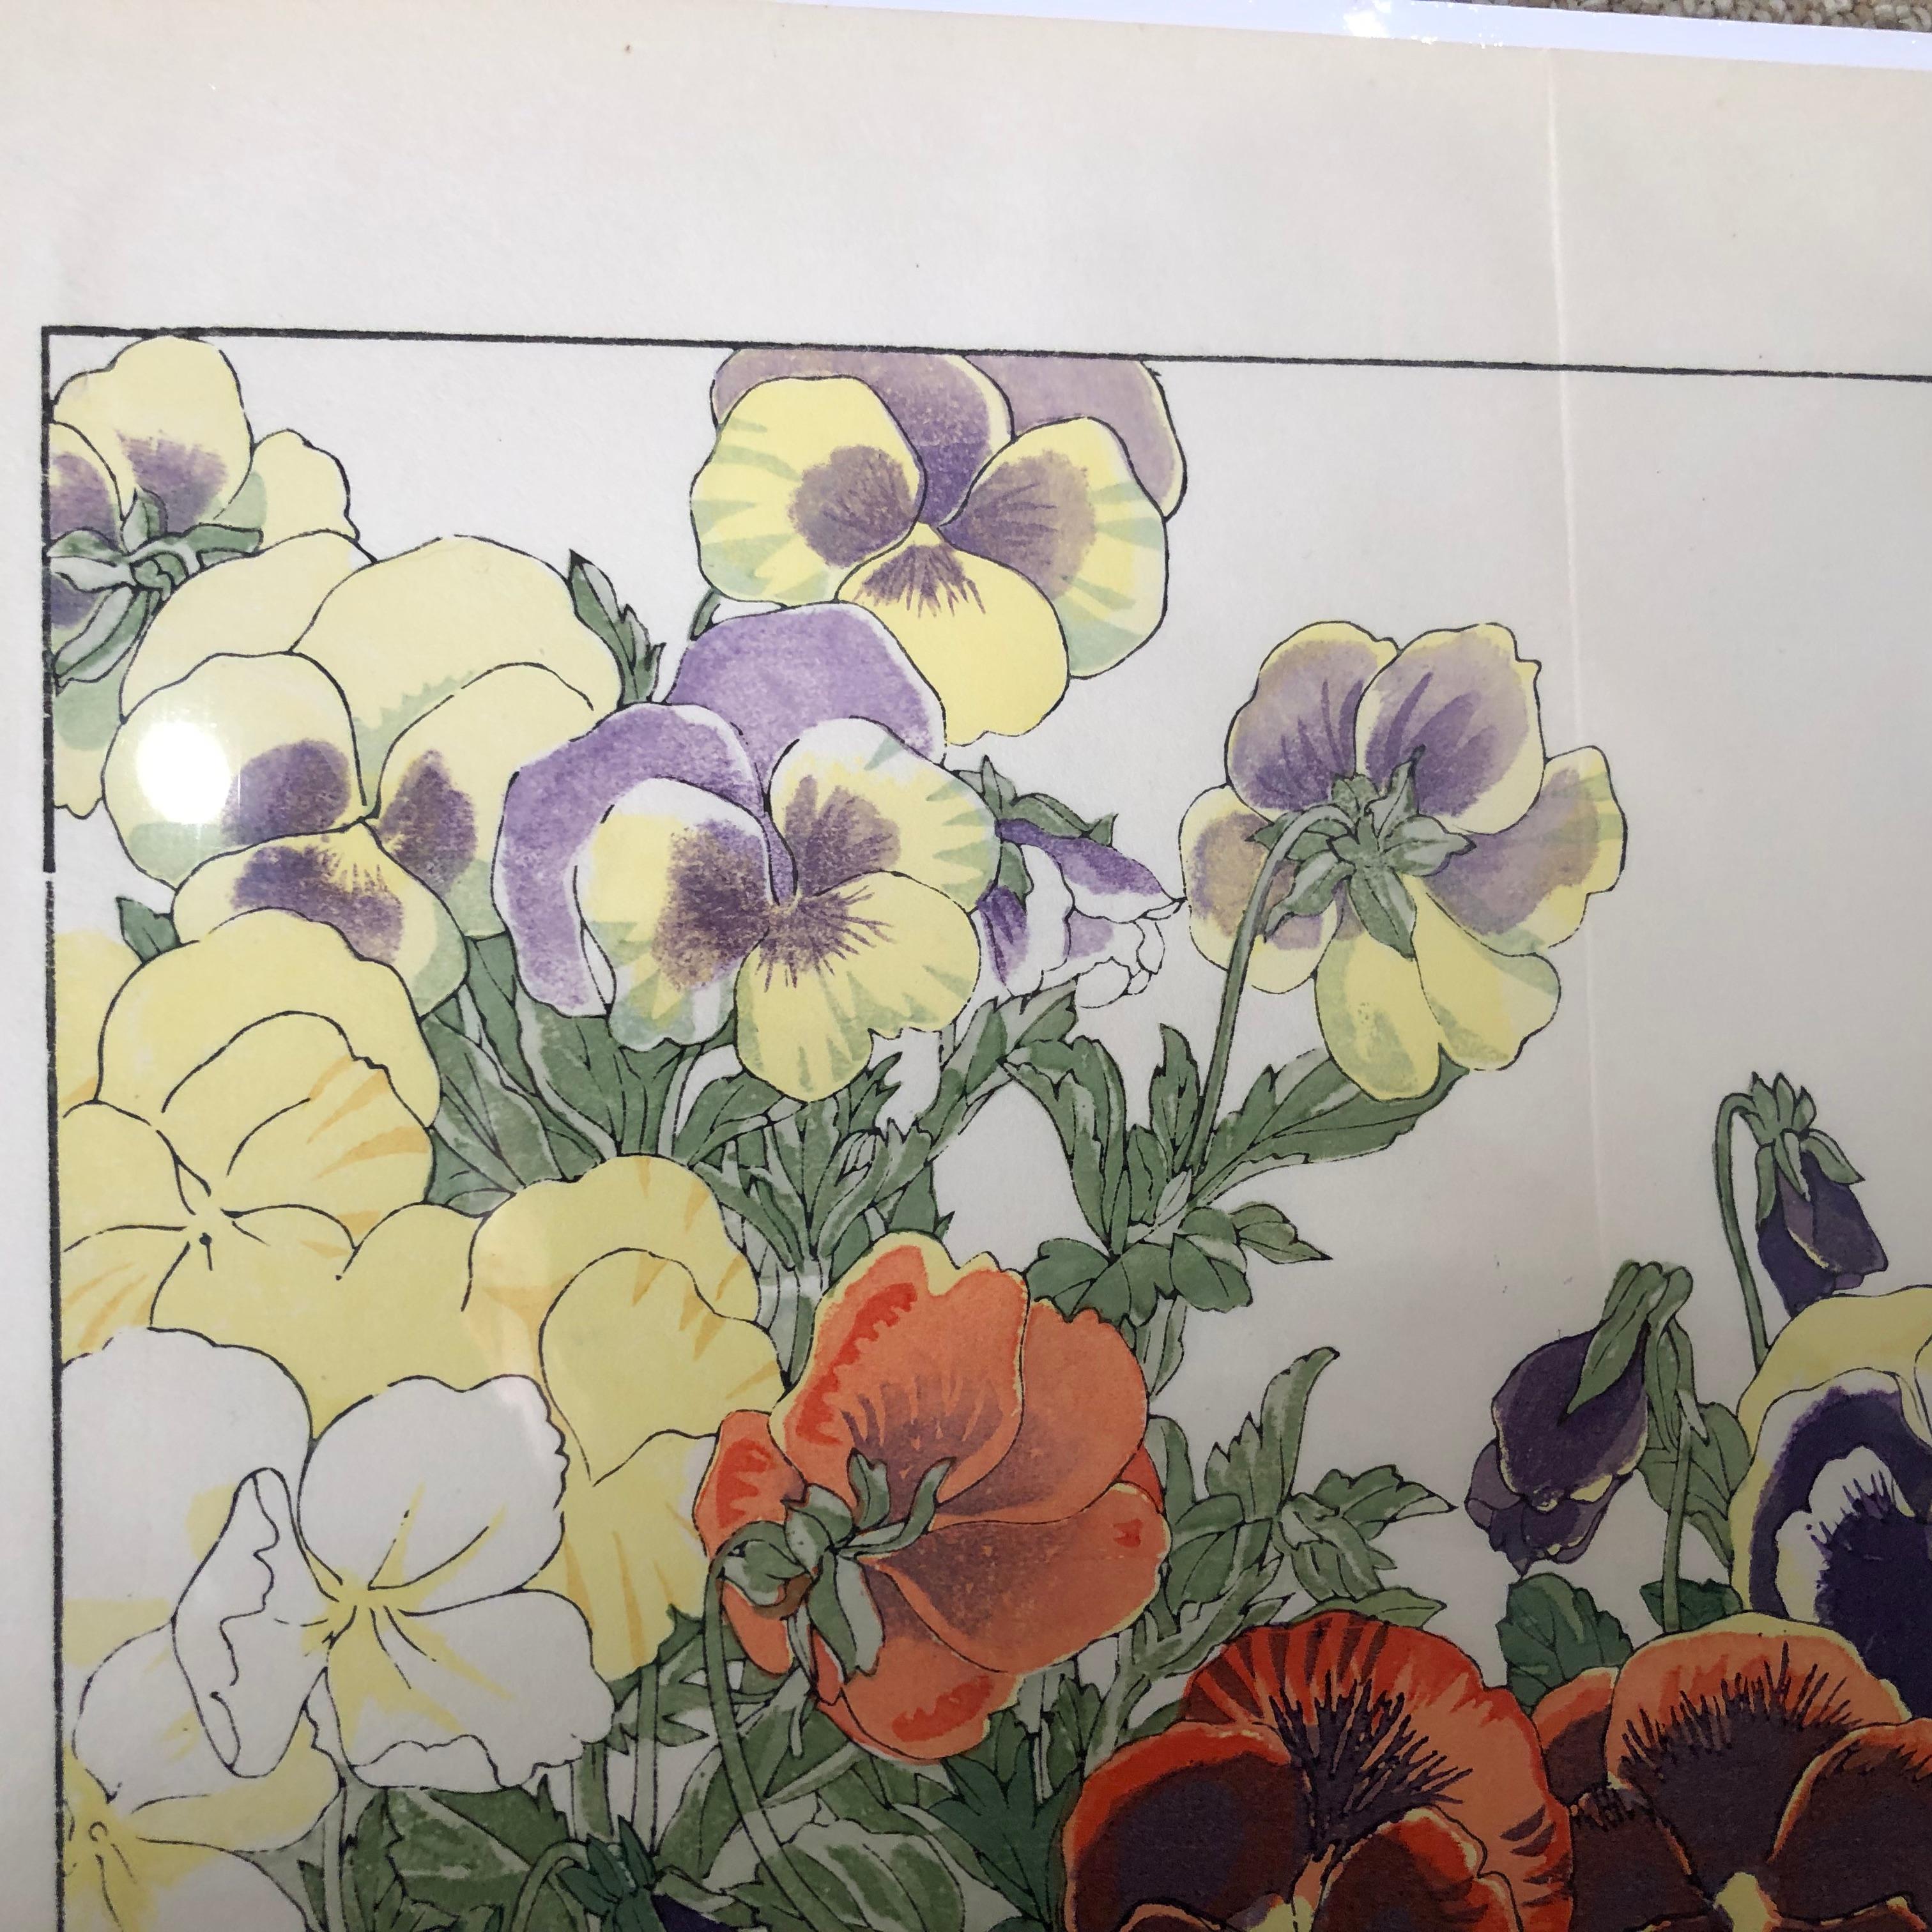 Paper Japanese Eight Old Woodblock Flower Prints, Superb Colors, Immed Frameable #2